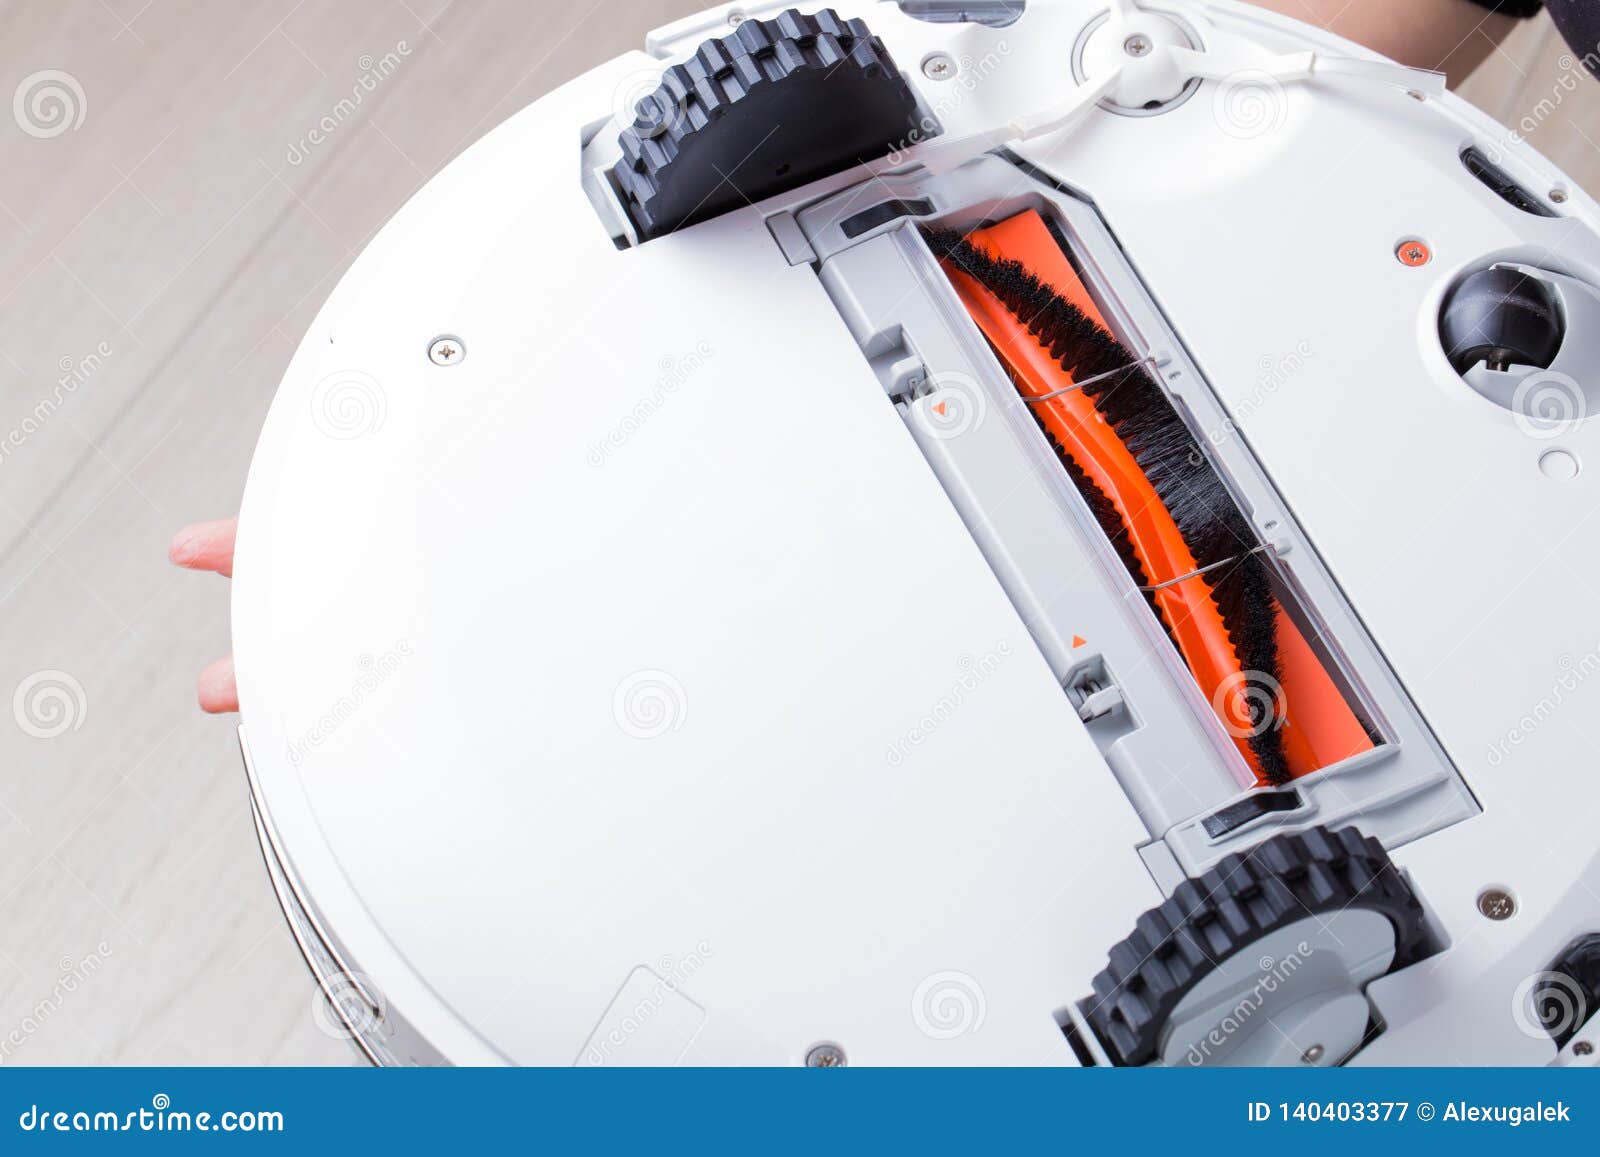 Robot Vacuum Cleaner Upside Down View Stock Image Image Of